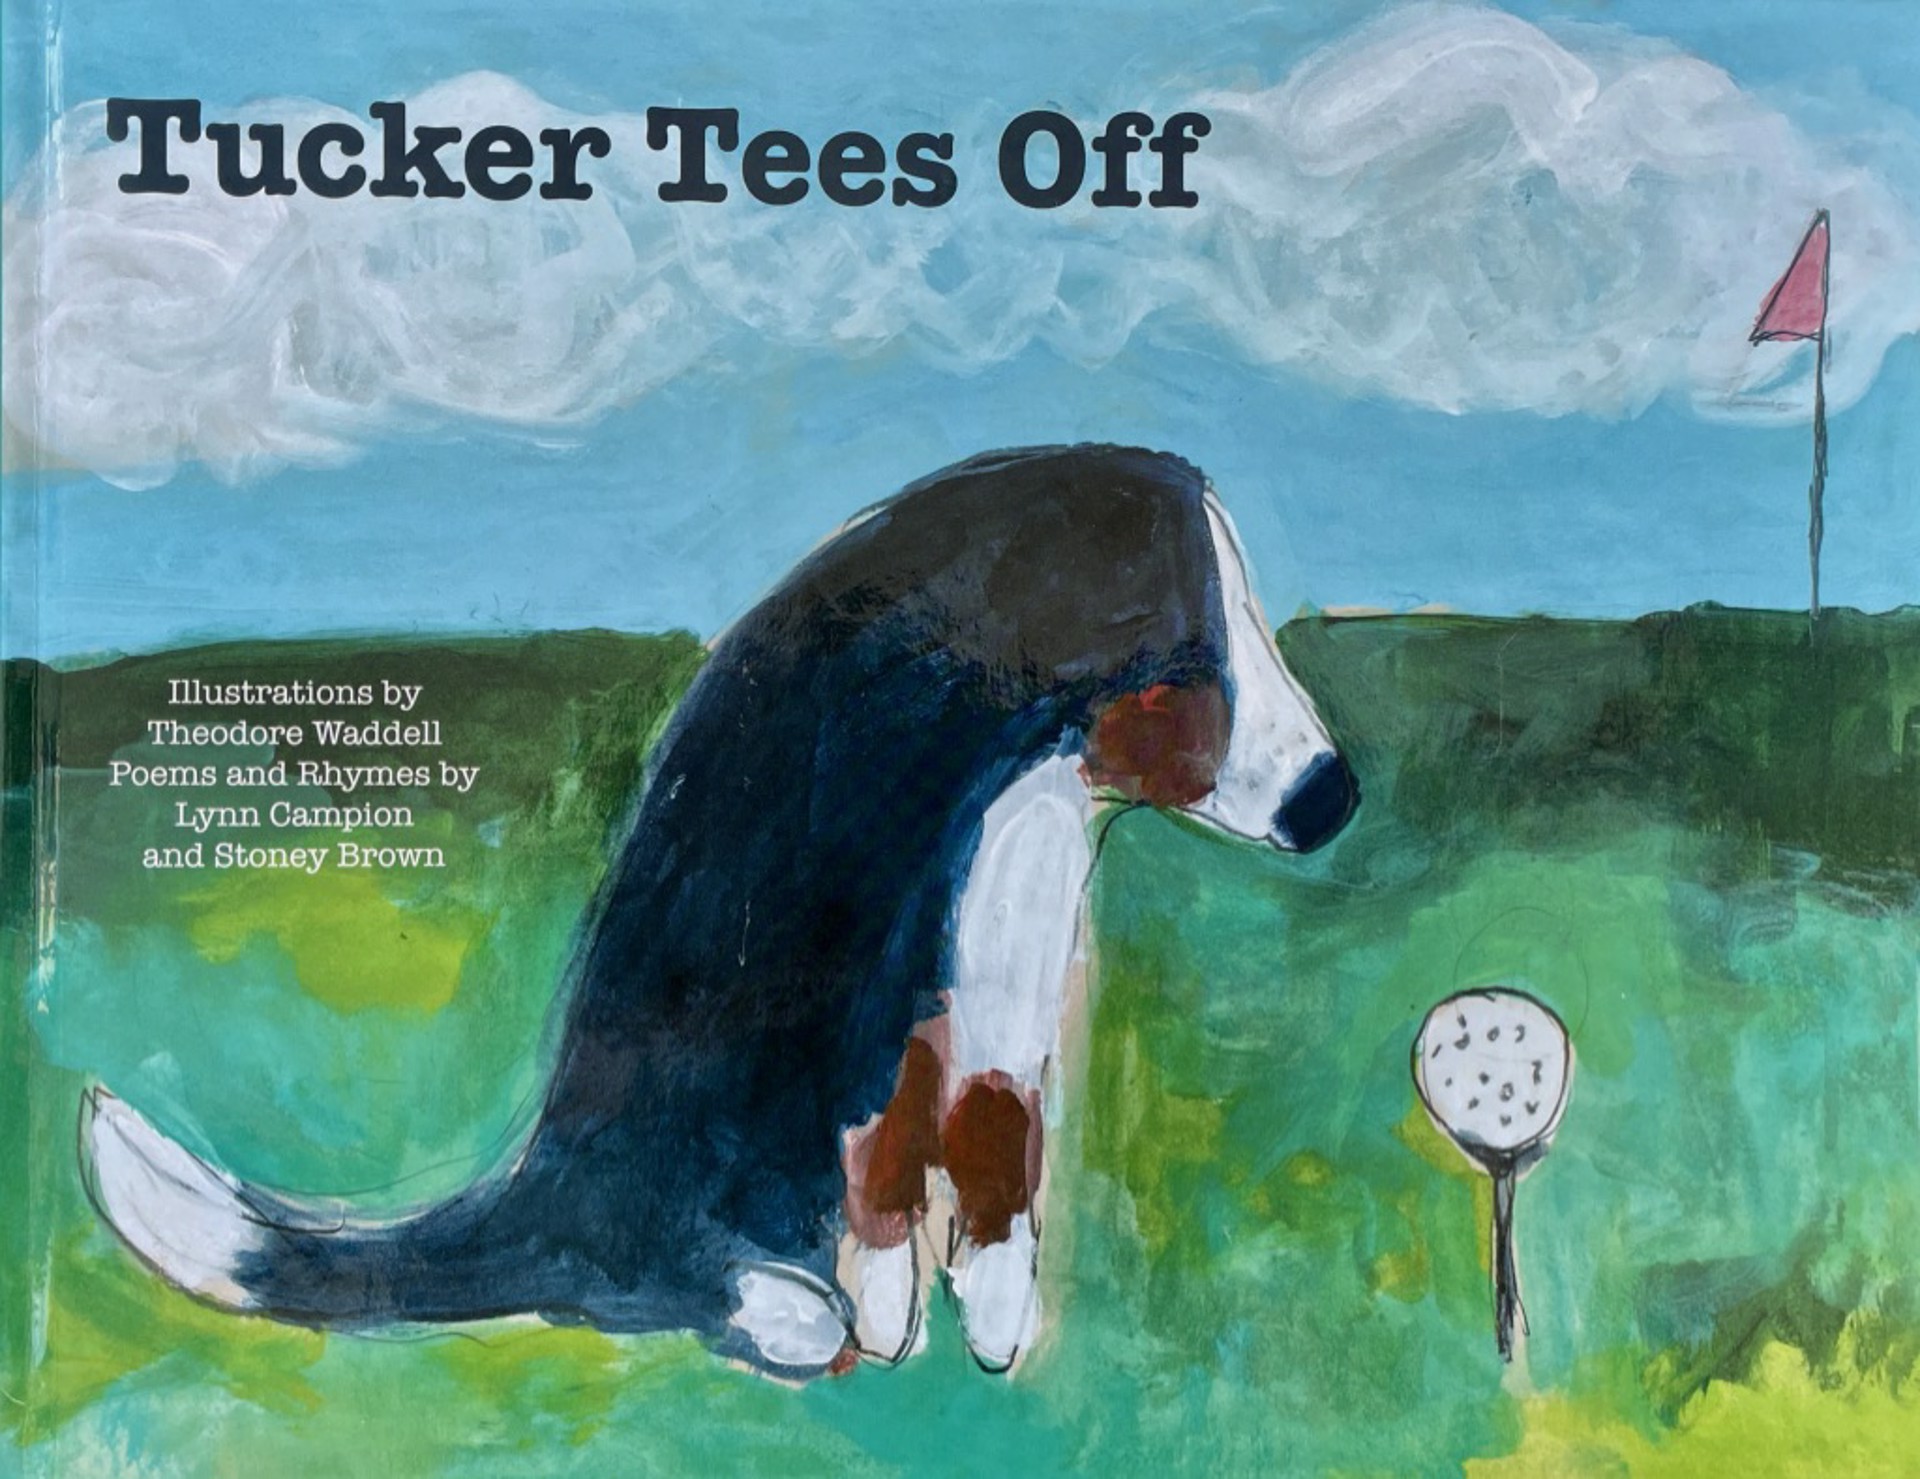 Tucker Tee's Off by Theodore Waddell